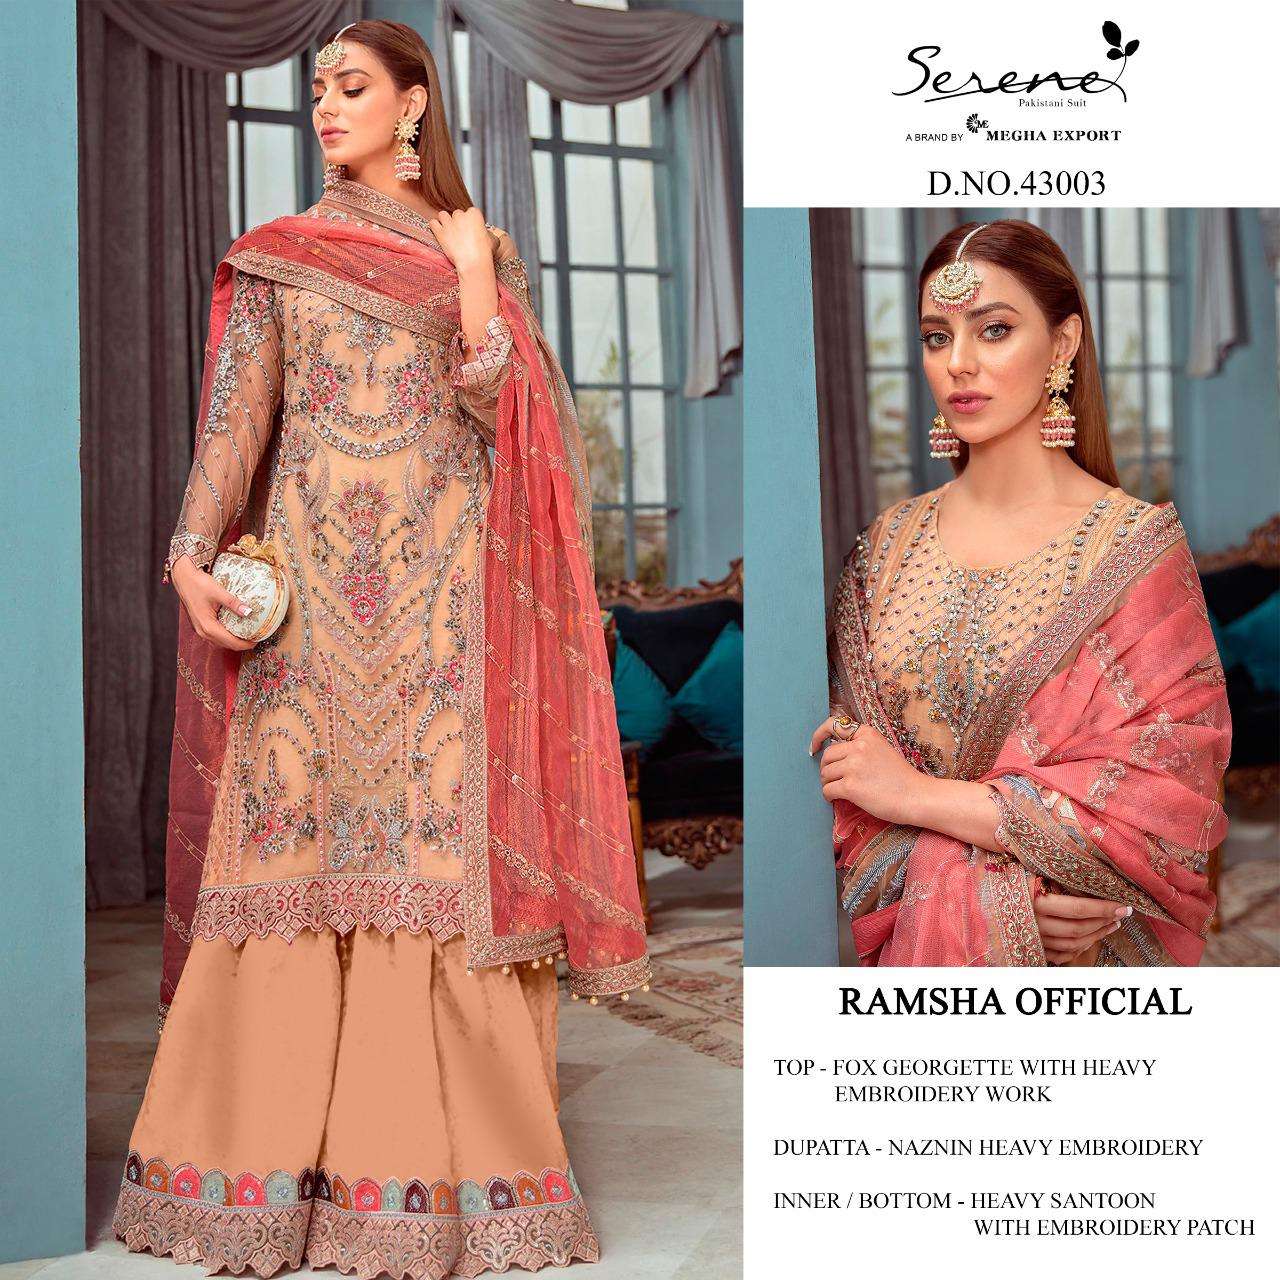 megha exports serene ramsha offical series 43001 - 43005 georgette pakistani collection online shopping surat 